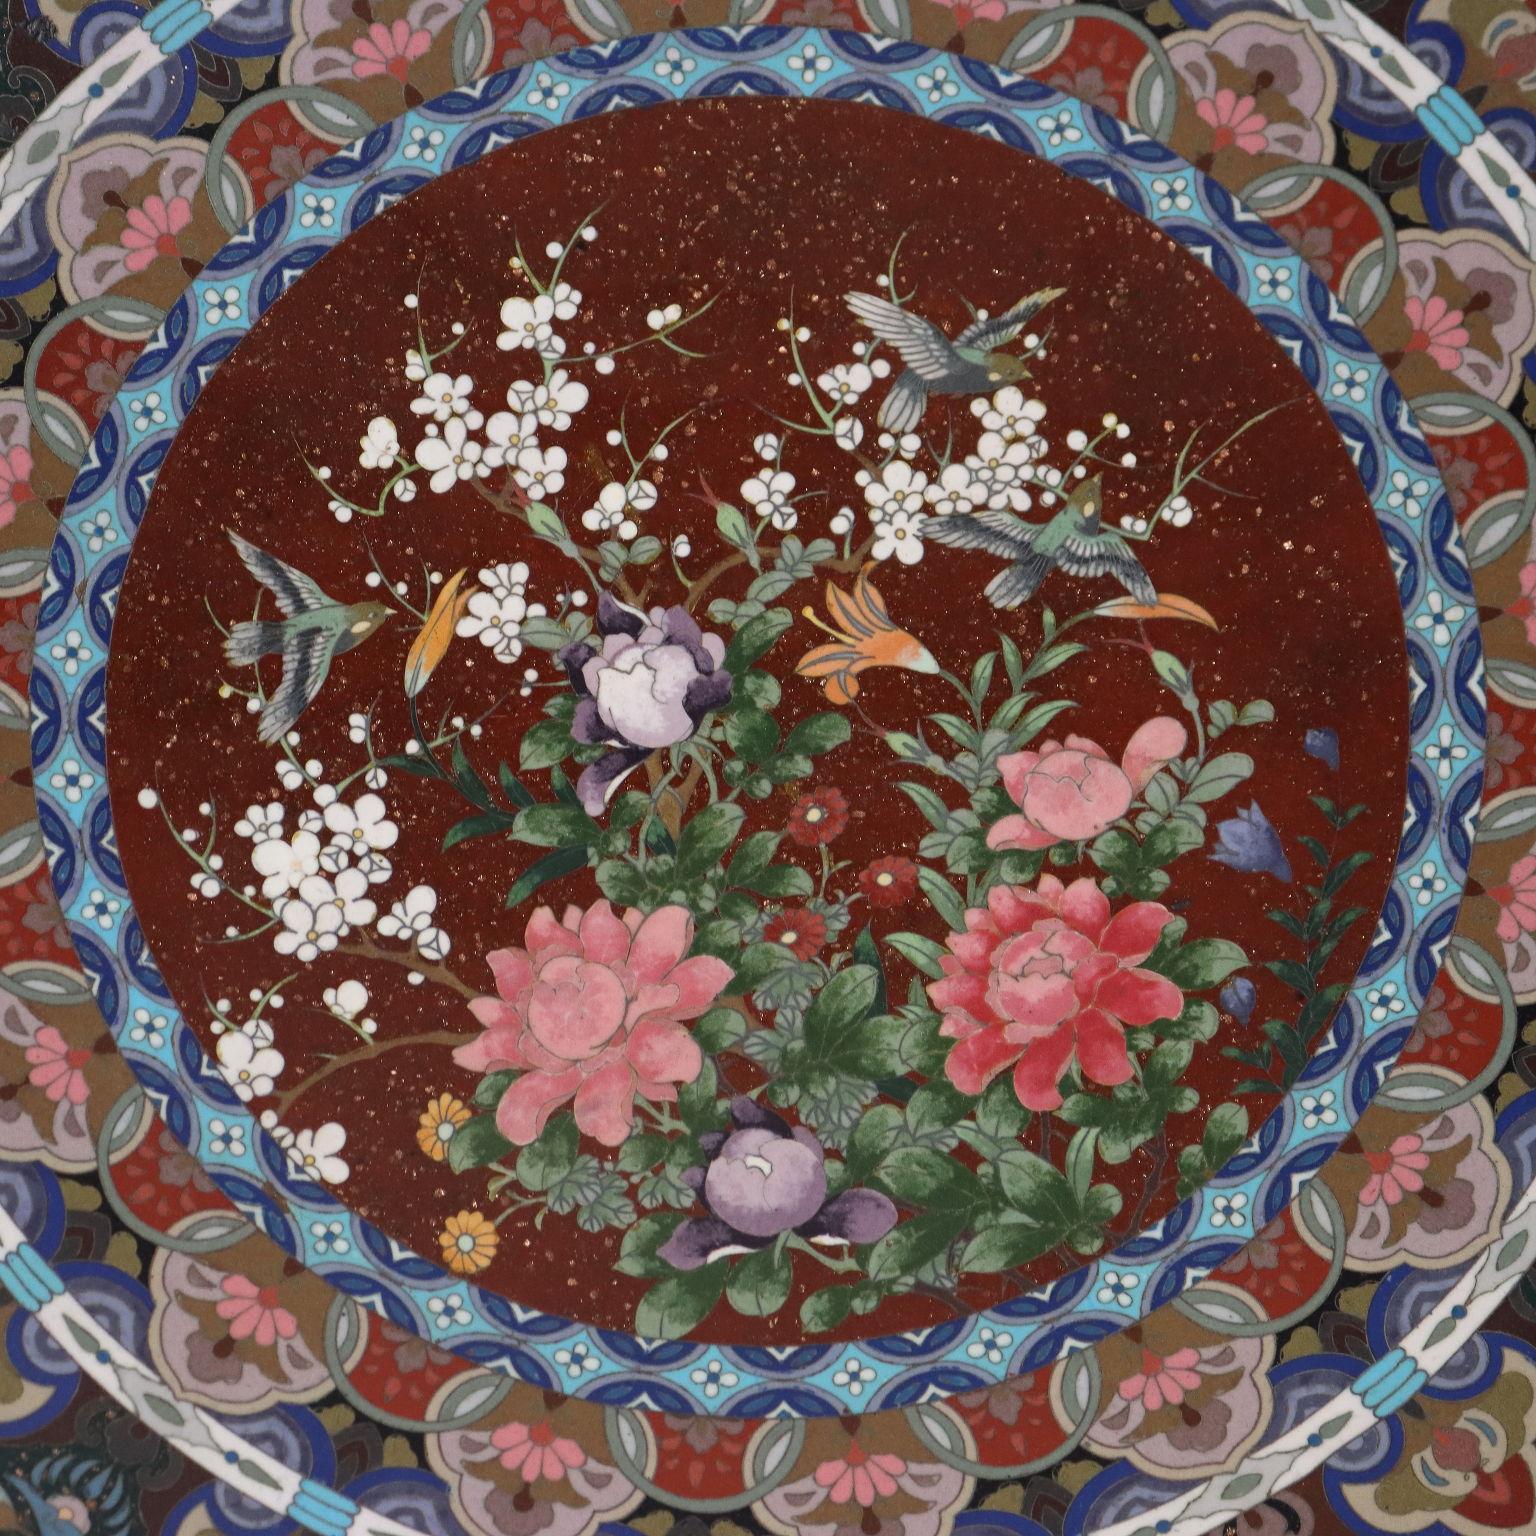 Large polylobed cloisonné enamel dish decorated in several concentric orders. A delicate composition of flowers and birds adorn its central part, all in the style of Namikawa Yasuyuki.